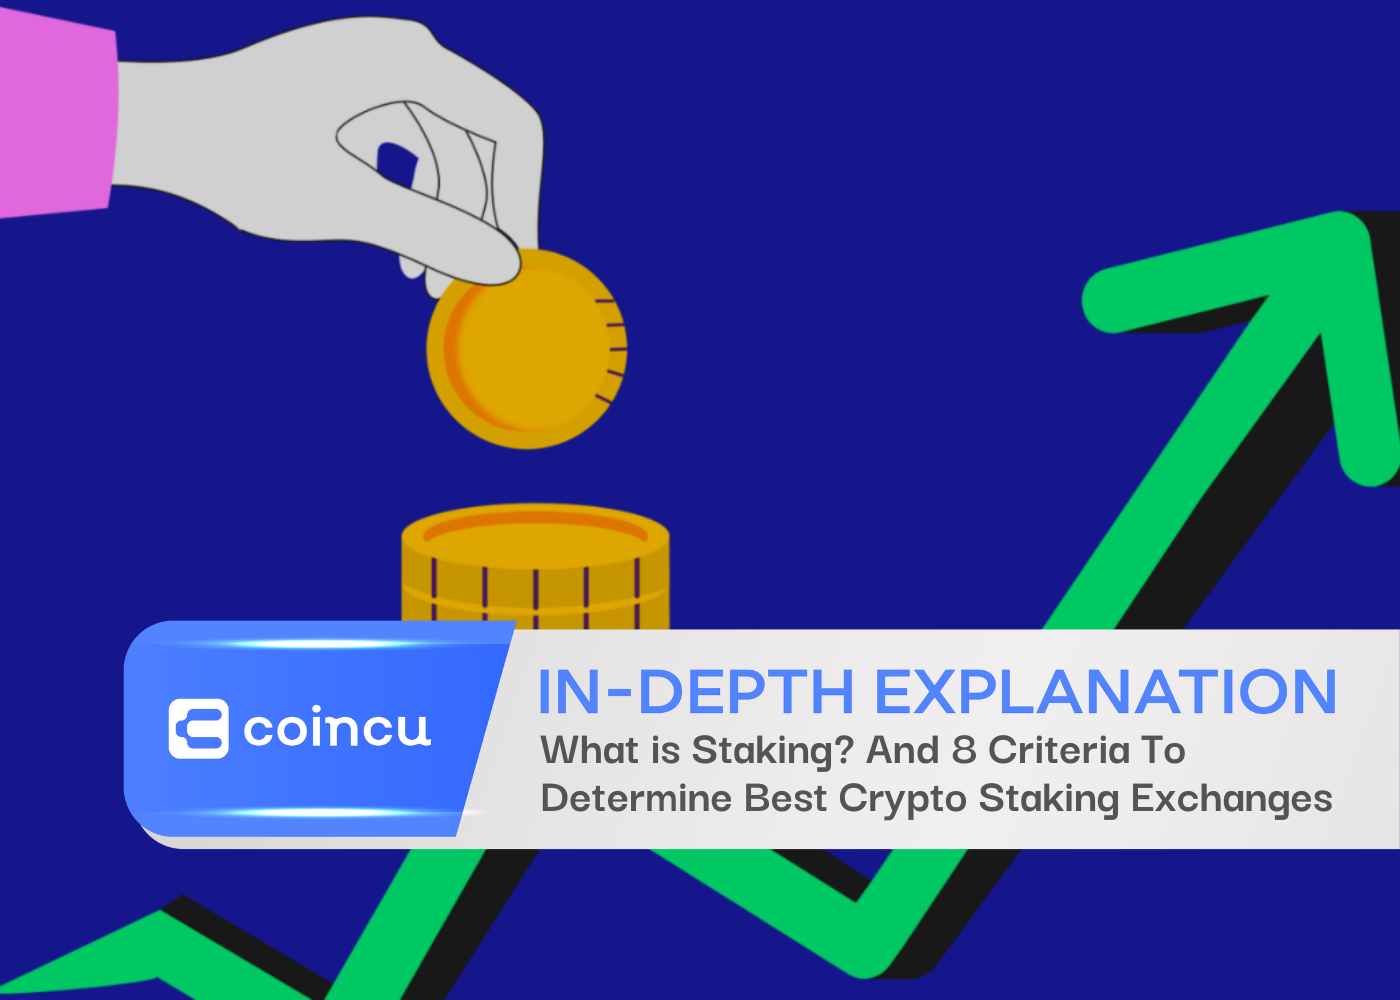 What is Staking? And 8 Criteria To Determine Best Crypto Staking Exchanges